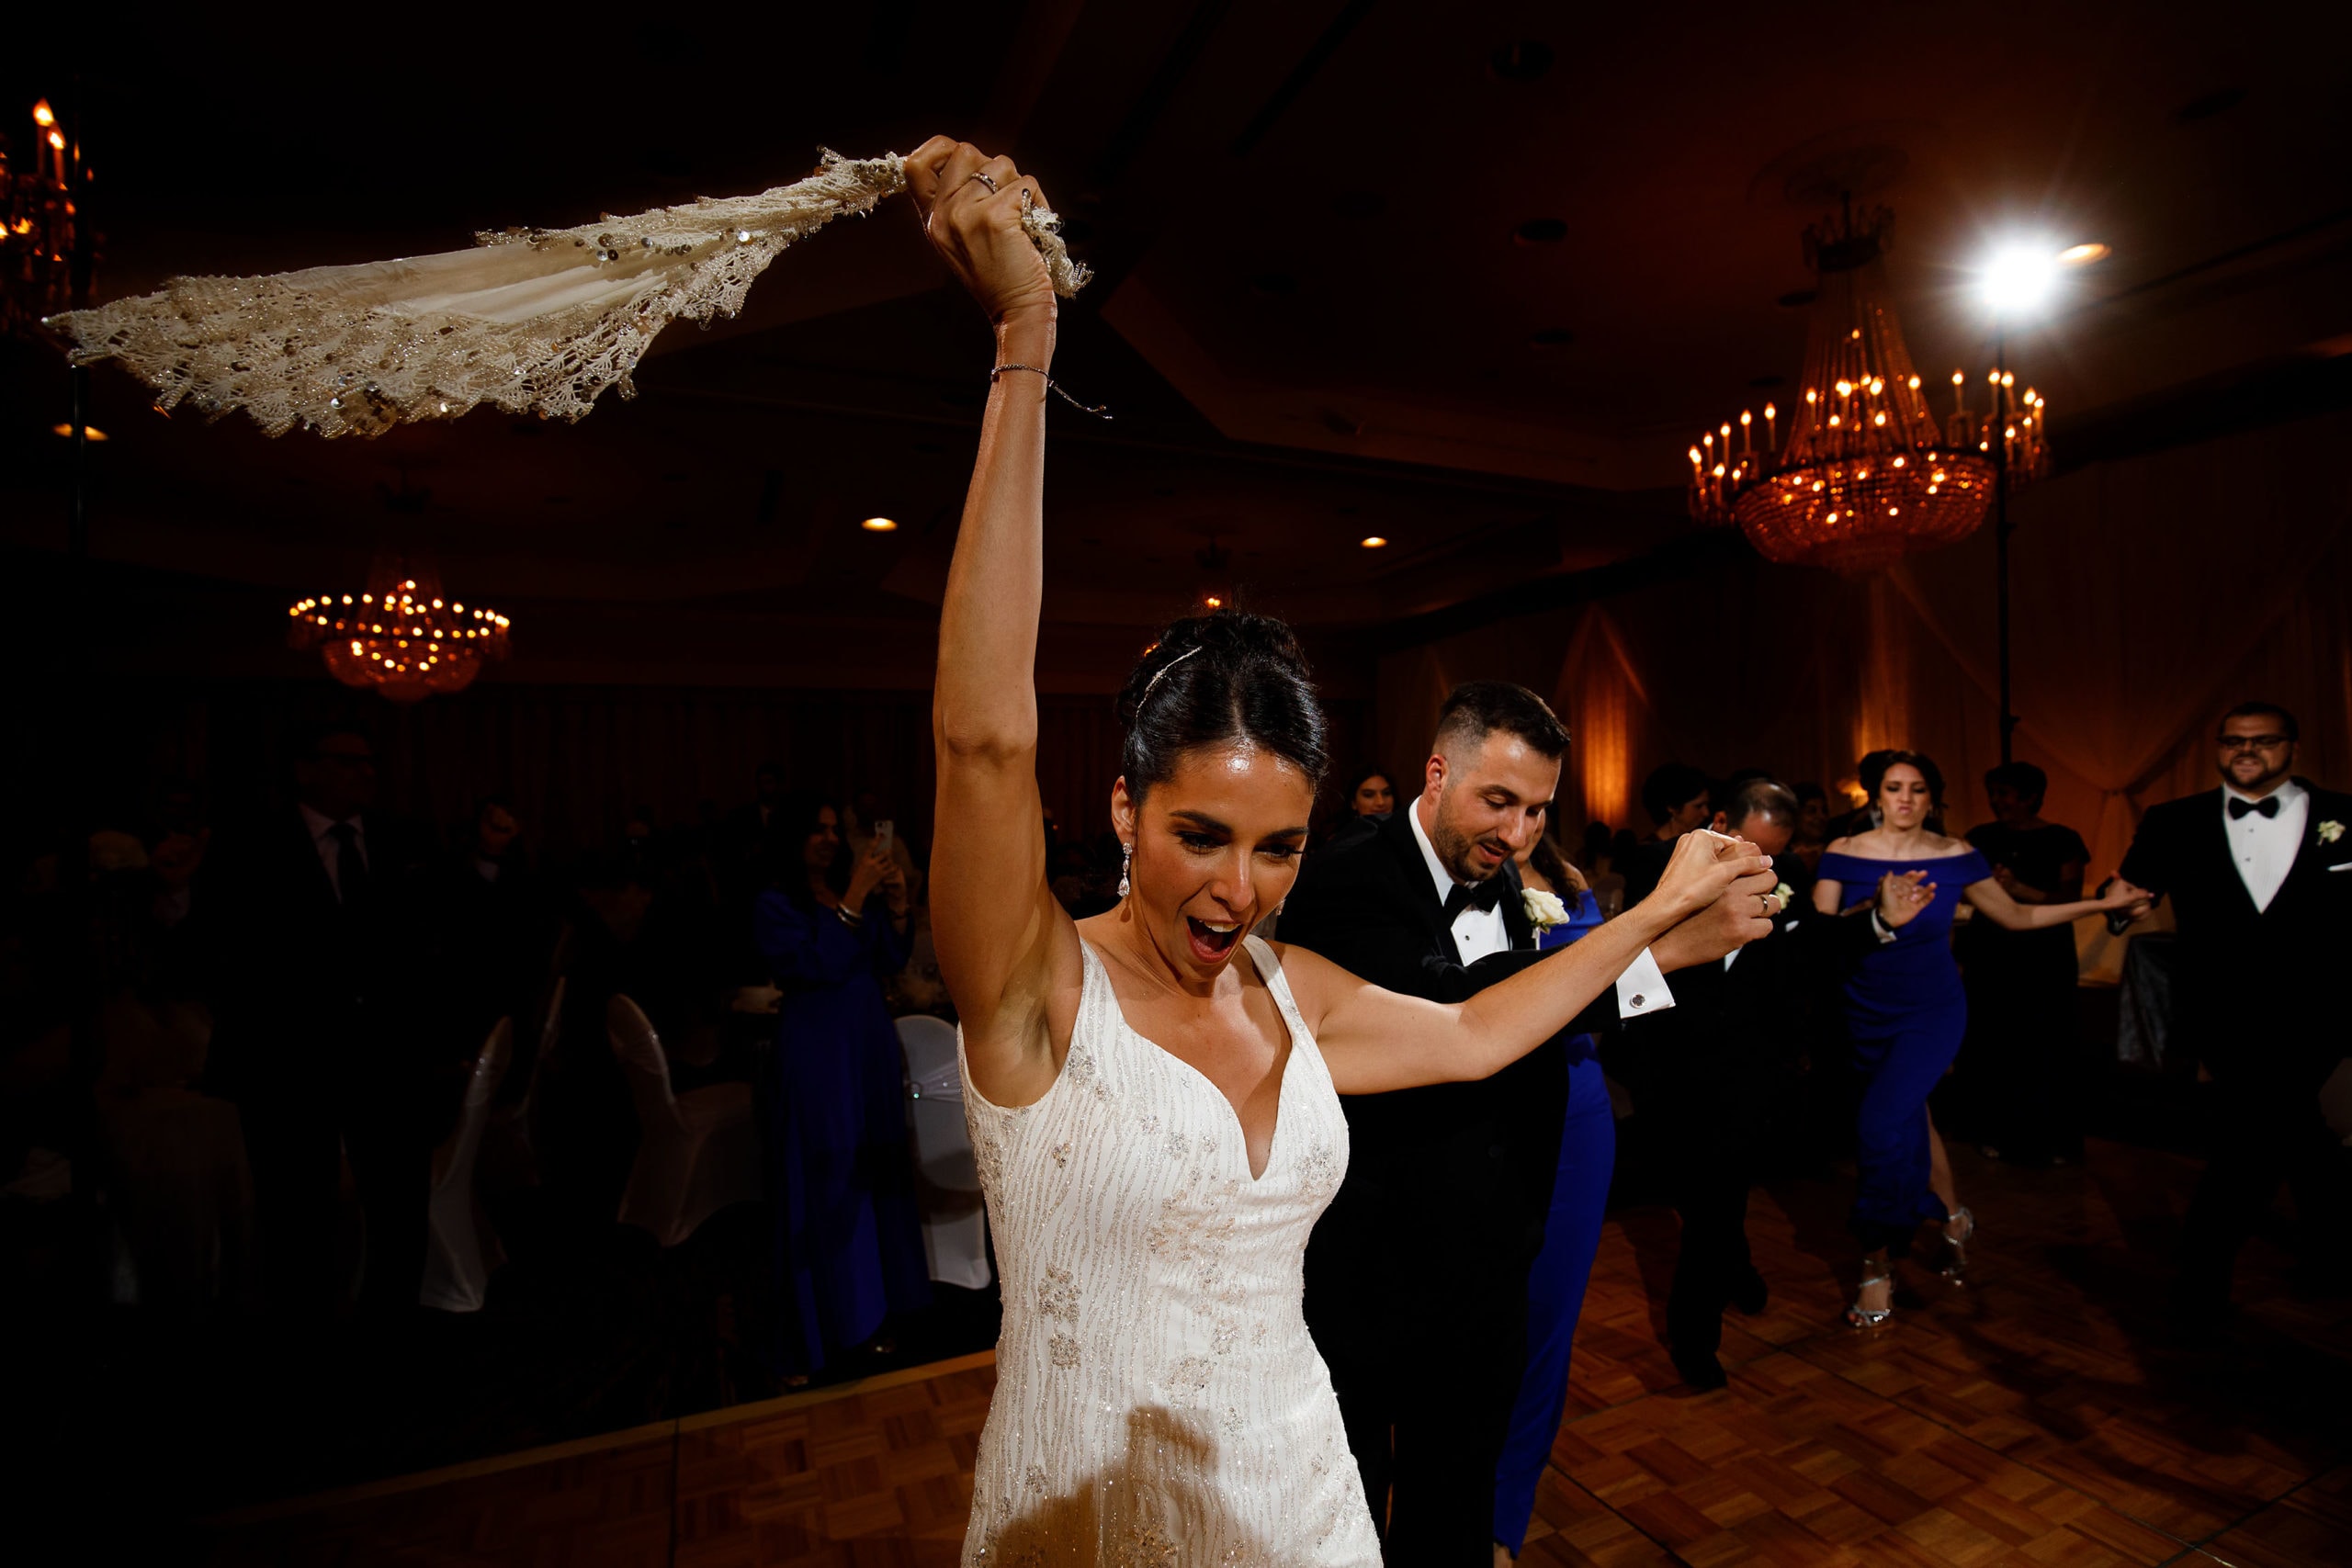 The bride leads the traditional Greek dance during her wedding at the Sheraton Albuquerque uptown